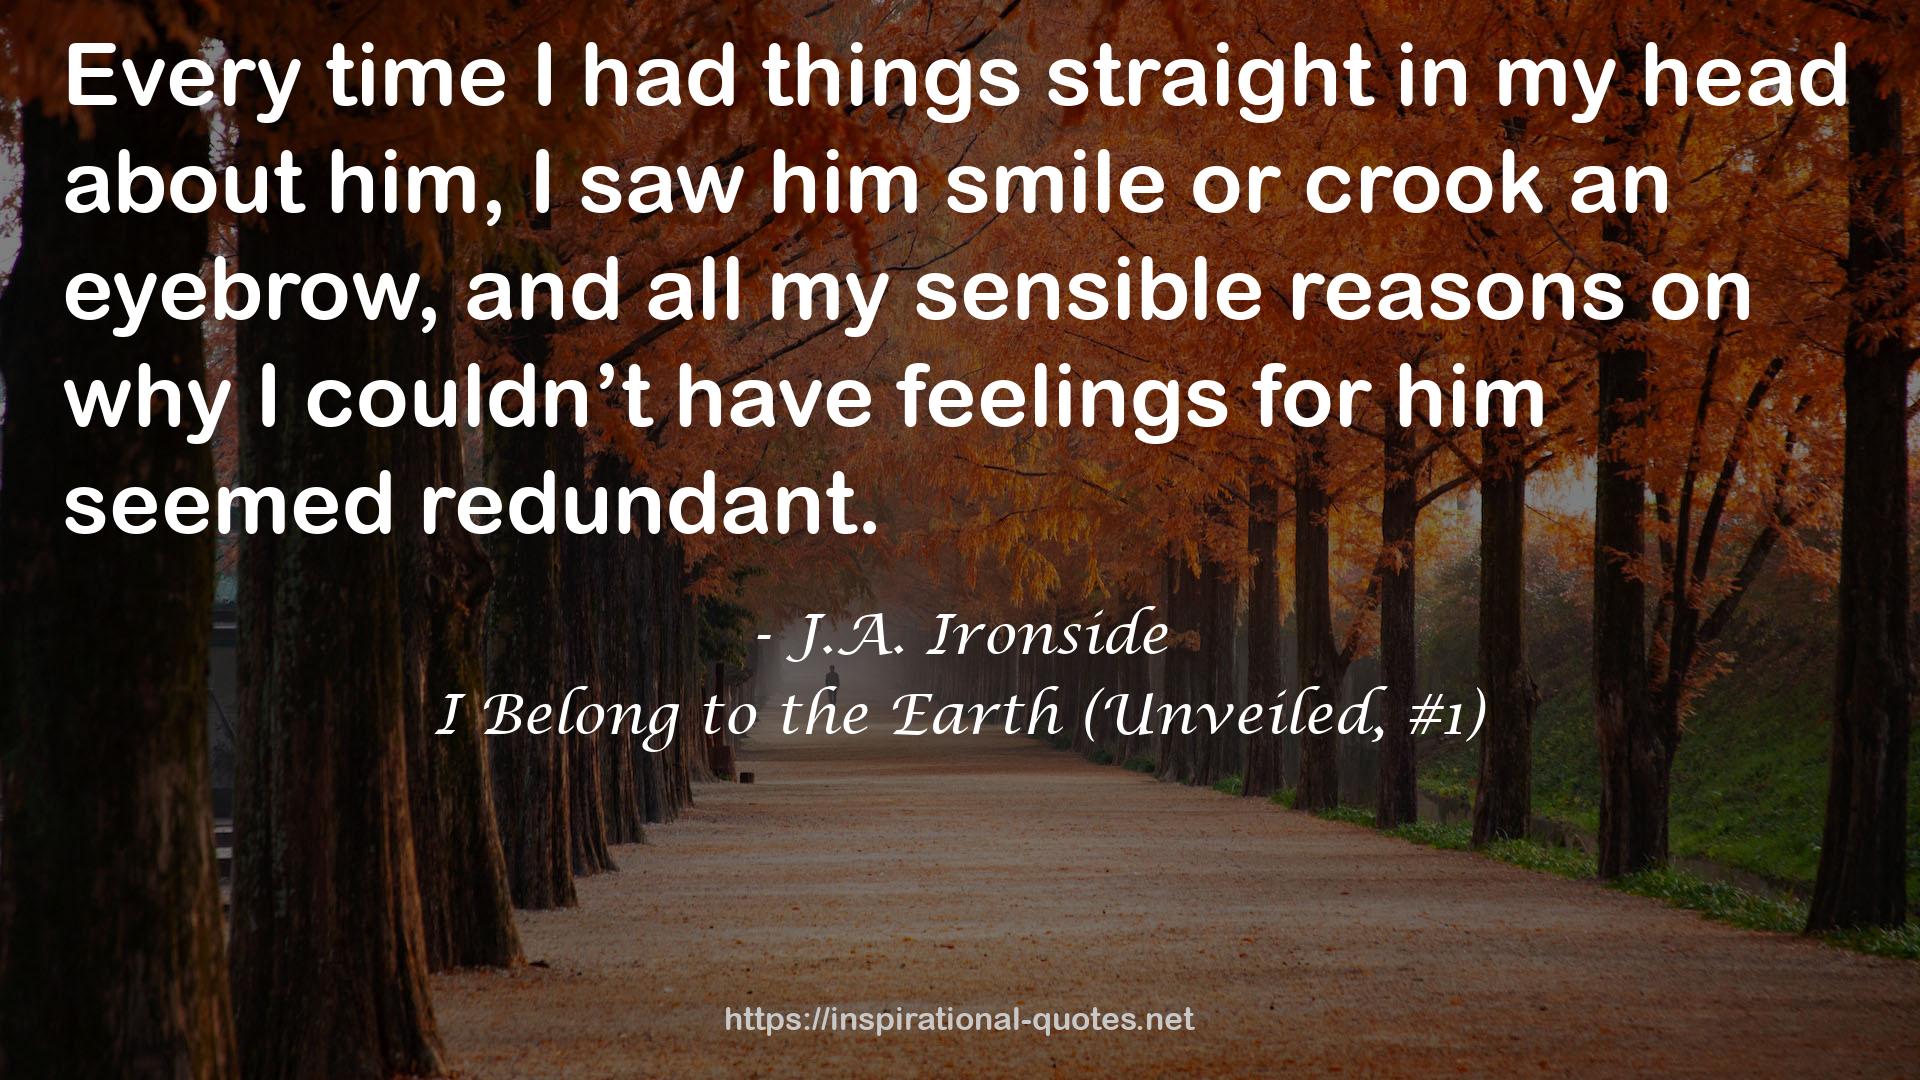 I Belong to the Earth (Unveiled, #1) QUOTES